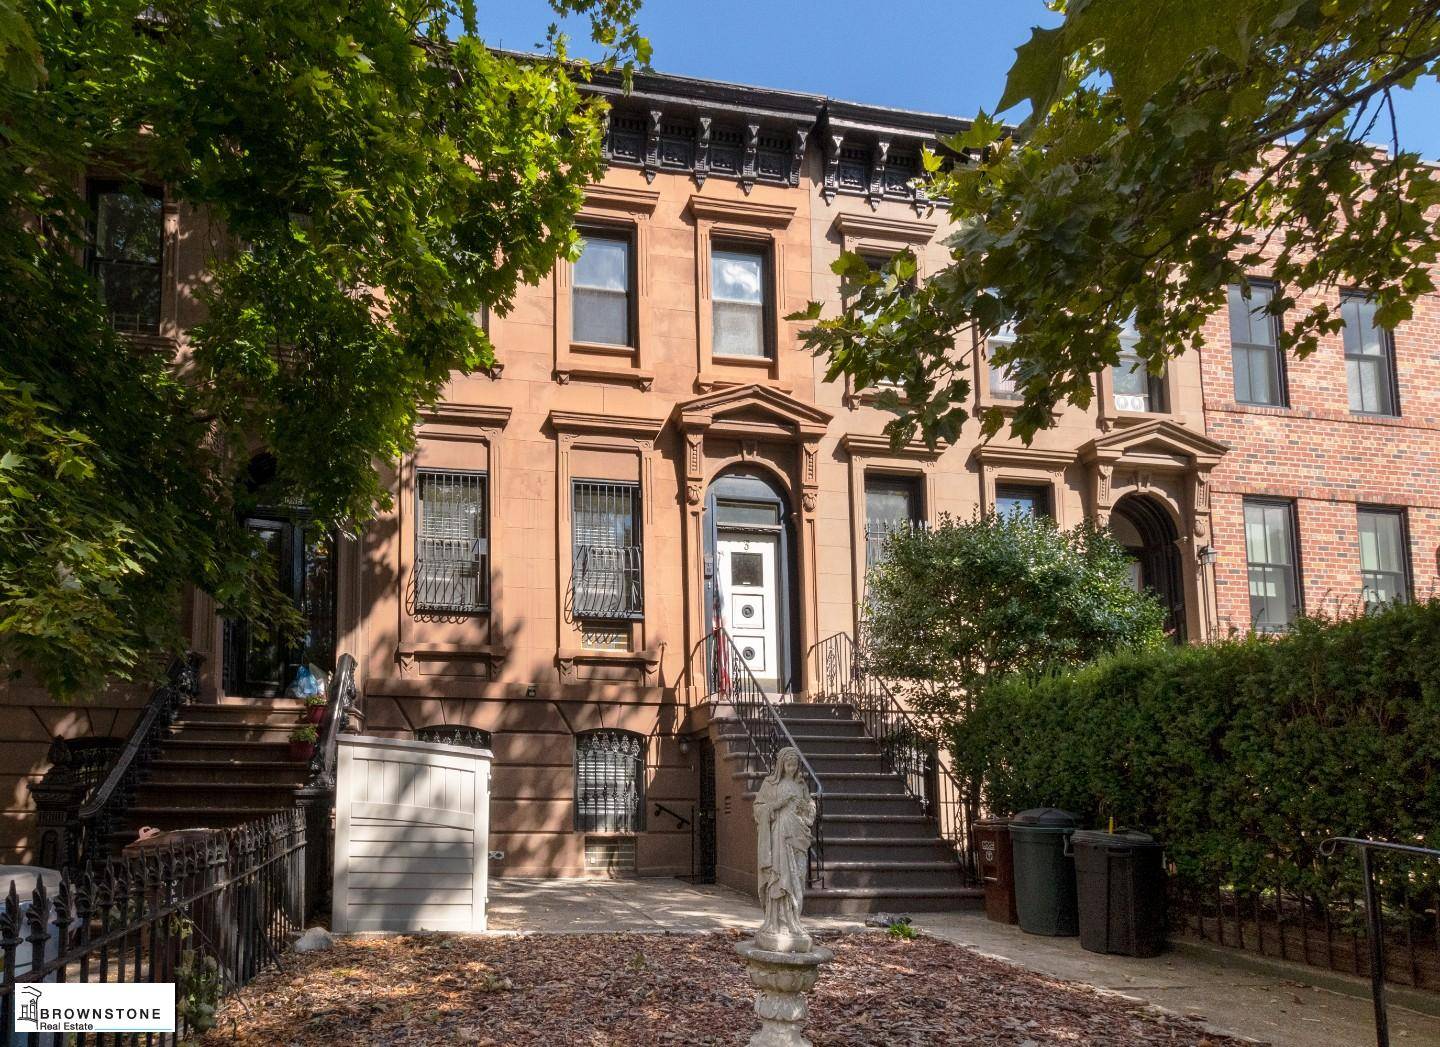 In the heart of Carroll Gardens, Third Place is lined with historic homes and leafy trees the essence of tranquility, quietude, and privacy.